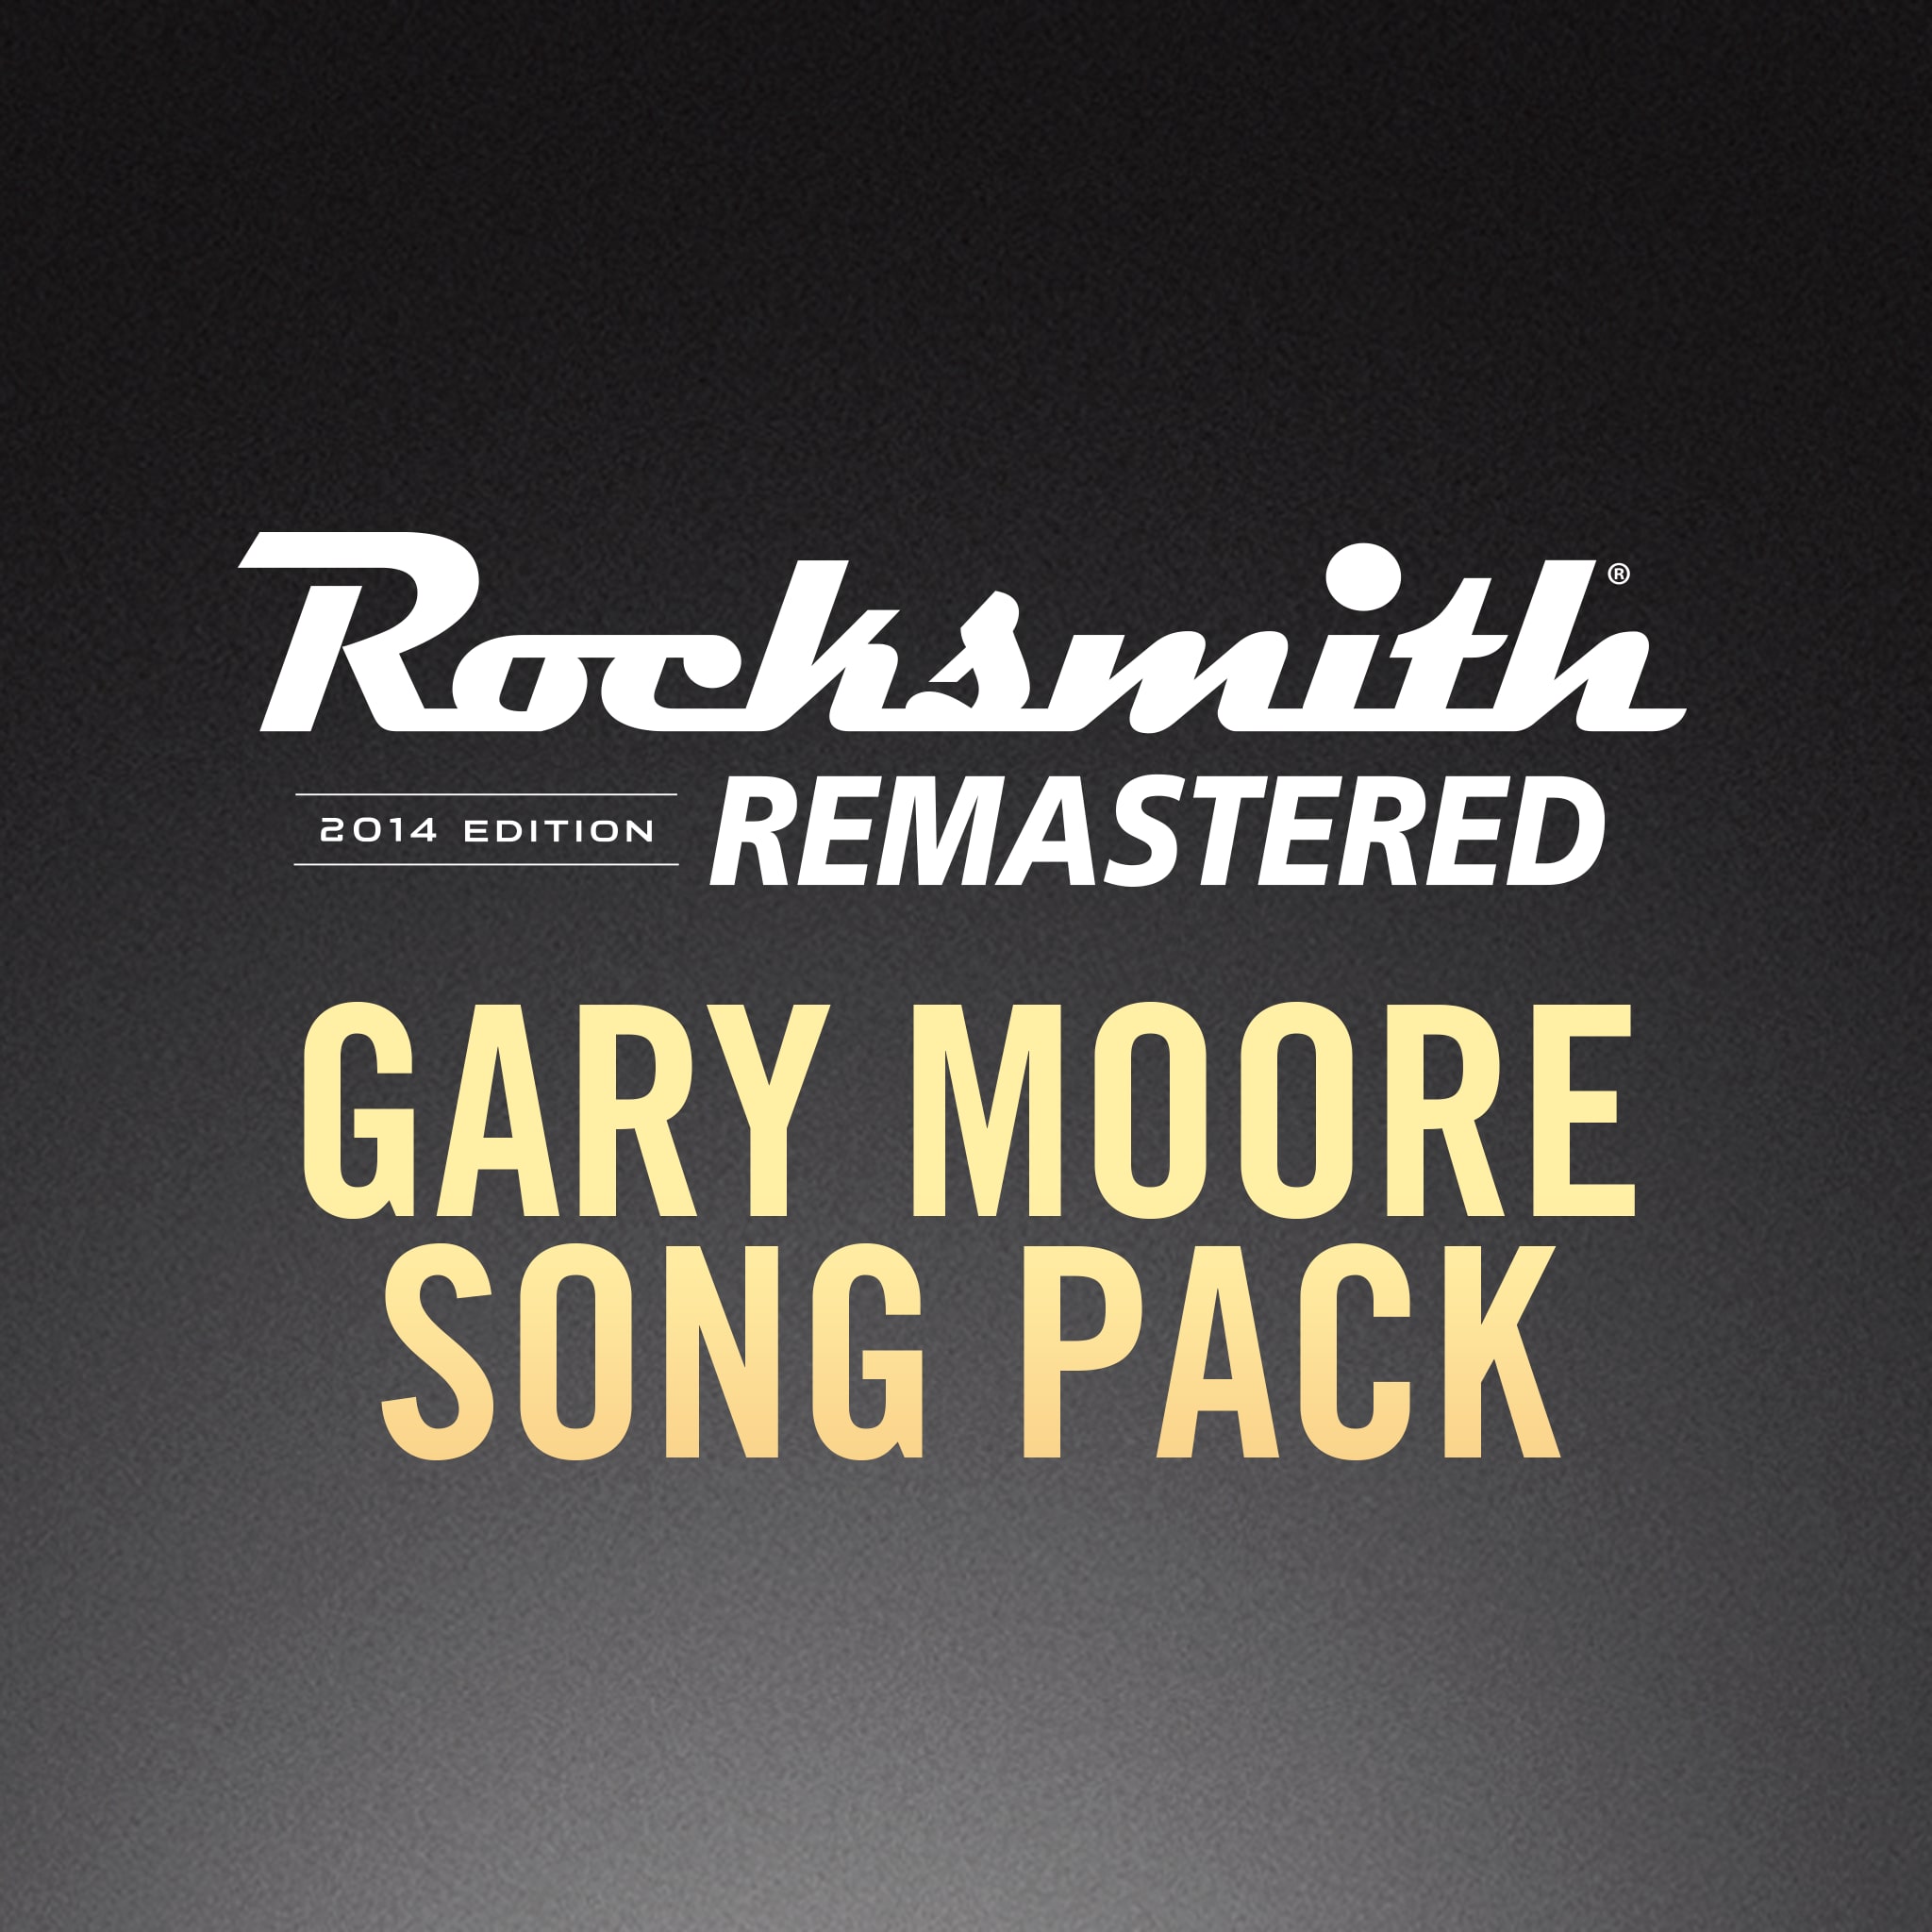 Rocksmith 2014 - Gary Moore Song Pack